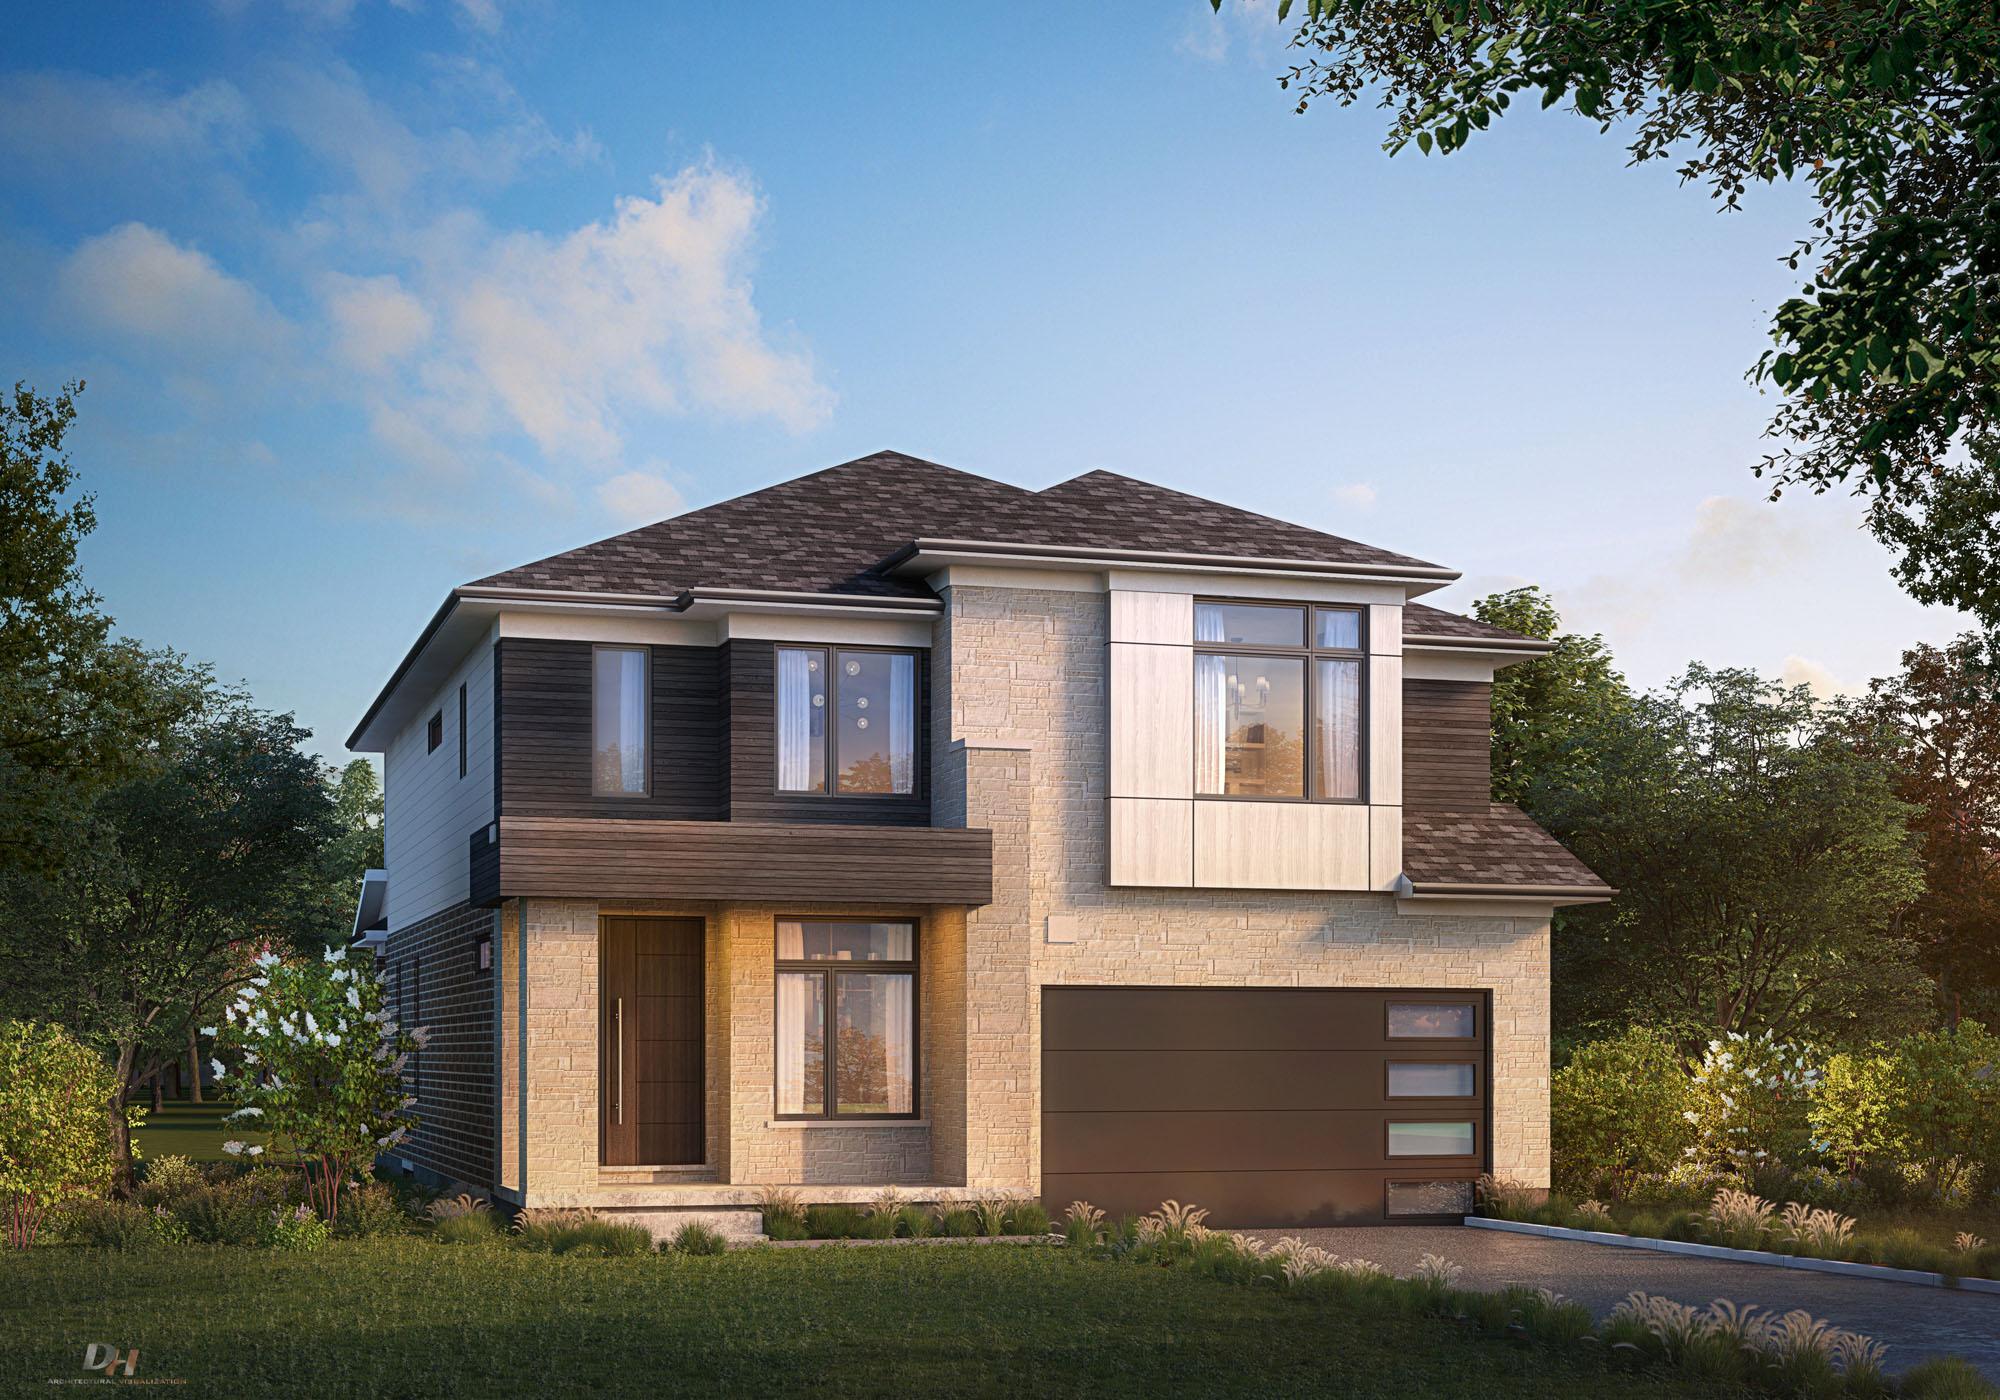 Detached houses and Townhomes | Architectural Renderings 3D Digital ...